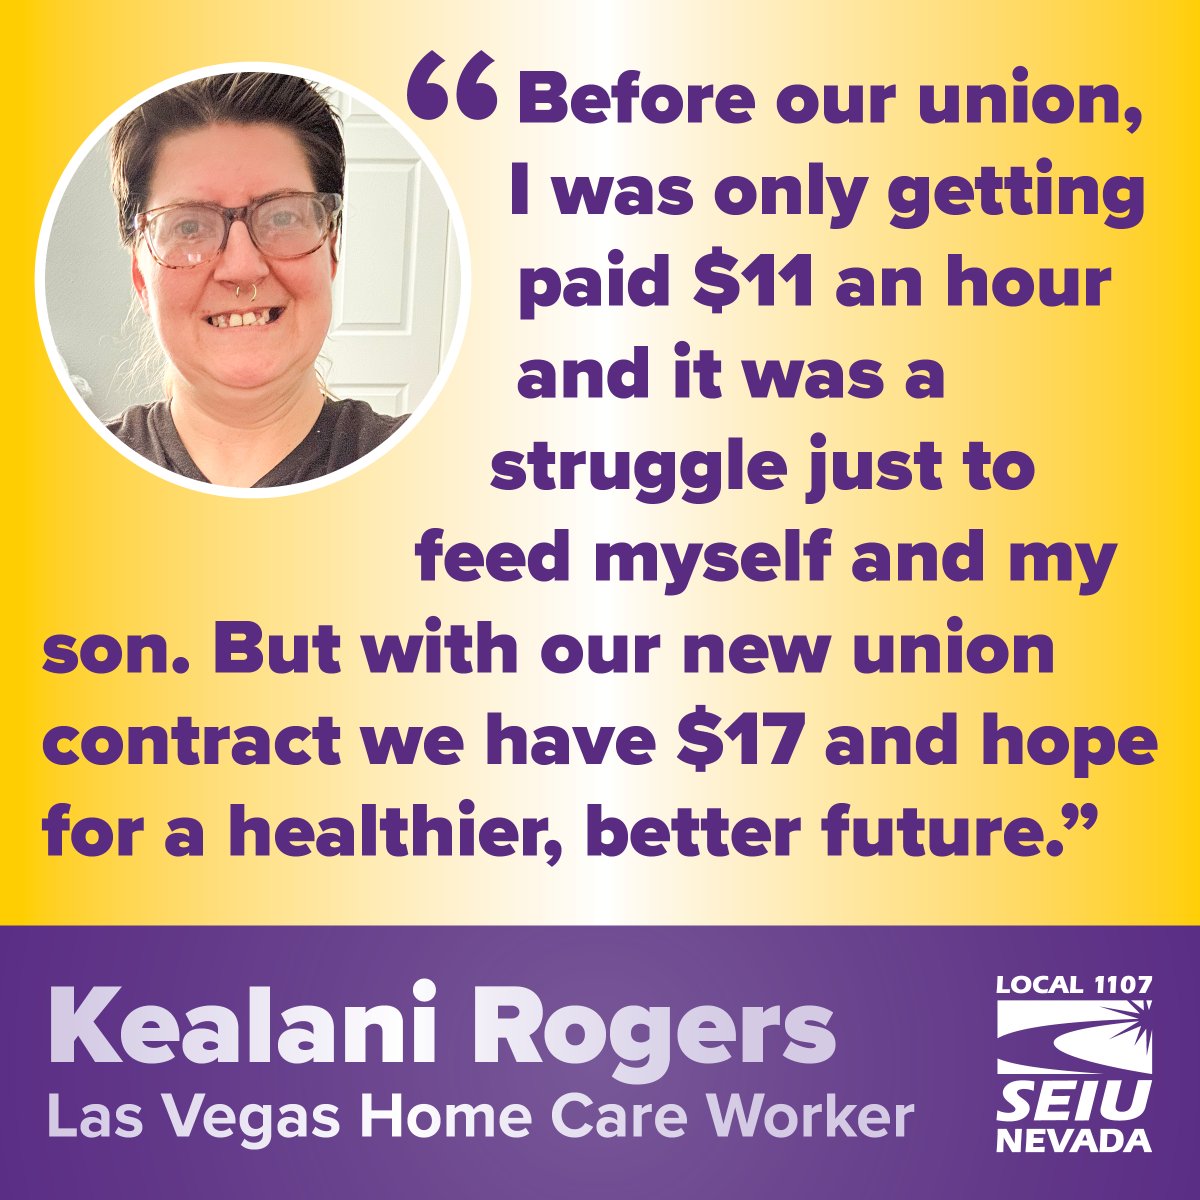 'Now that we have our new union contract with $17, I can buy nutritious food and a gym membership. That's what our union is all about: supporting our well-being so we can be there for our clients.' 
-Kealani Rogers, Home Care Worker #HomeCareForNV #CareIsEssential #UnionsForAll